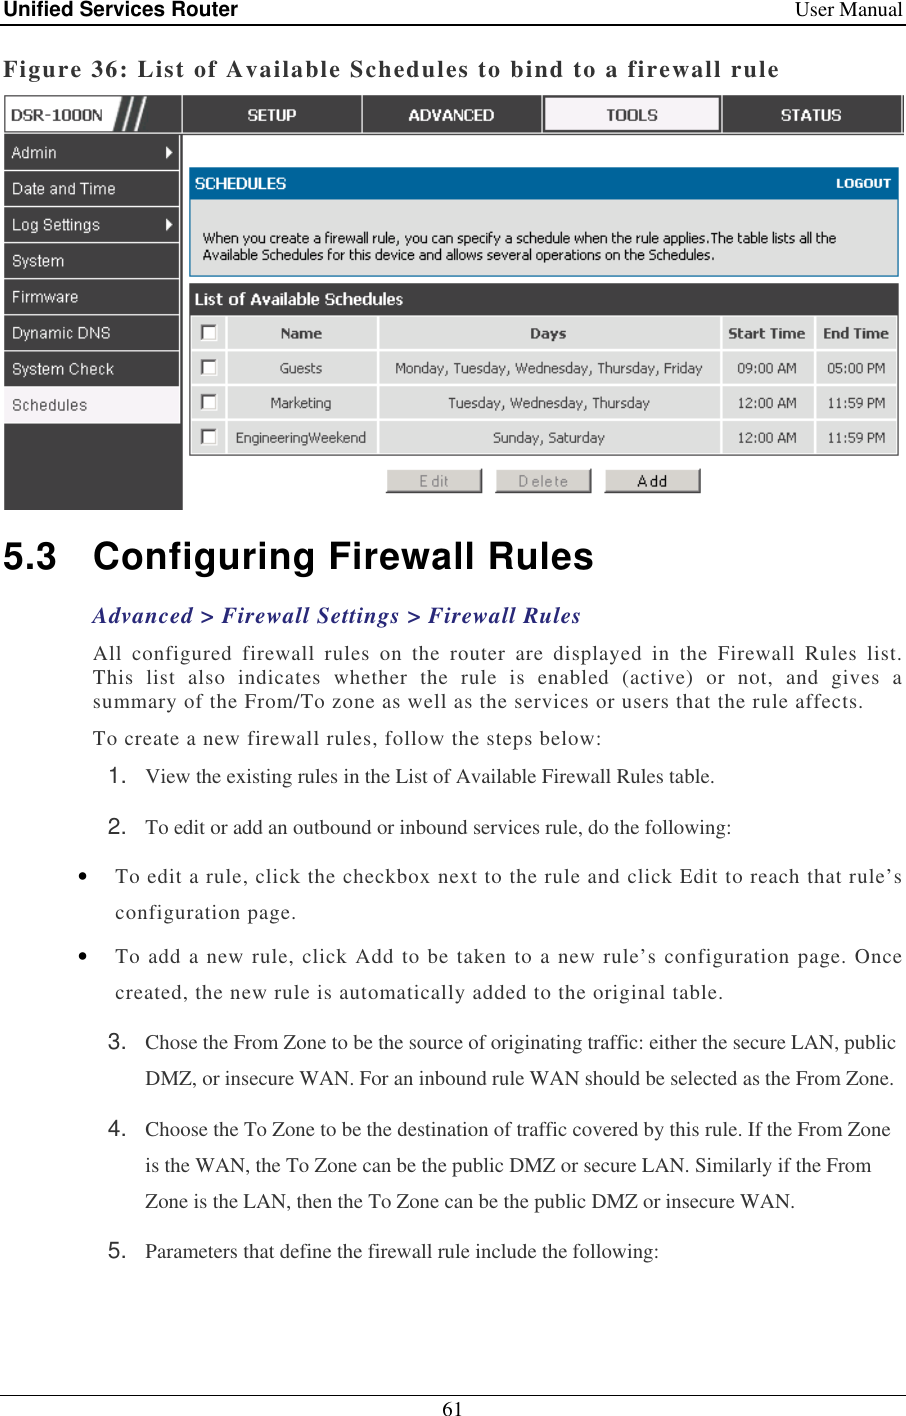 Unified Services Router    User Manual 61  Figure 36: List of Available Schedules to bind to a firewall rule  5.3  Configuring Firewall Rules Advanced &gt; Firewall Settings &gt; Firewall Rules All  configured  firewall  rules  on  the  router  are  displayed  in  the  Firewall  Rules  list. This  list  also  indicates  whether  the  rule  is  enabled  (active)  or  not,  and  gives  a summary of the From/To zone as well as the services or users that the rule affects.  To create a new firewall rules, follow the steps below: 1.  View the existing rules in the List of Available Firewall Rules table. 2.  To edit or add an outbound or inbound services rule, do the following: • To edit a rule, click the checkbox next to the rule and click Edit to reach that rule’s configuration page.  • To add a new rule, click Add to be taken to a new rule’s configuration page. Once created, the new rule is automatically added to the original table.  3.  Chose the From Zone to be the source of originating traffic: either the secure LAN, public DMZ, or insecure WAN. For an inbound rule WAN should be selected as the From Zone. 4.  Choose the To Zone to be the destination of traffic covered by this rule. If the From Zone is the WAN, the To Zone can be the public DMZ or secure LAN. Similarly if the From Zone is the LAN, then the To Zone can be the public DMZ or insecure WAN.  5.  Parameters that define the firewall rule include the following: 